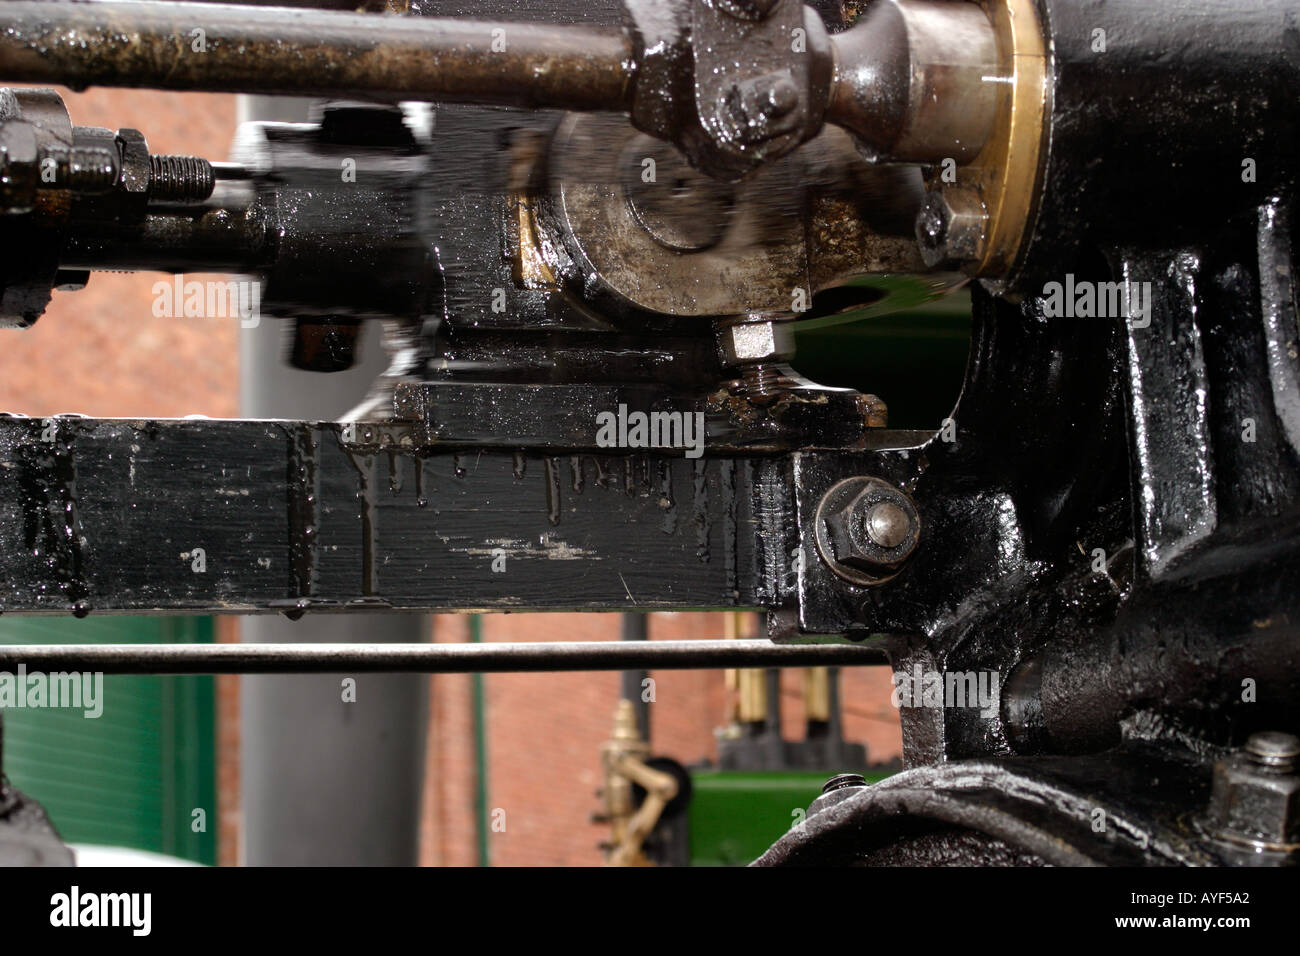 Detail of slide mechanism on traction engine Vehicle unknown Stock Photo